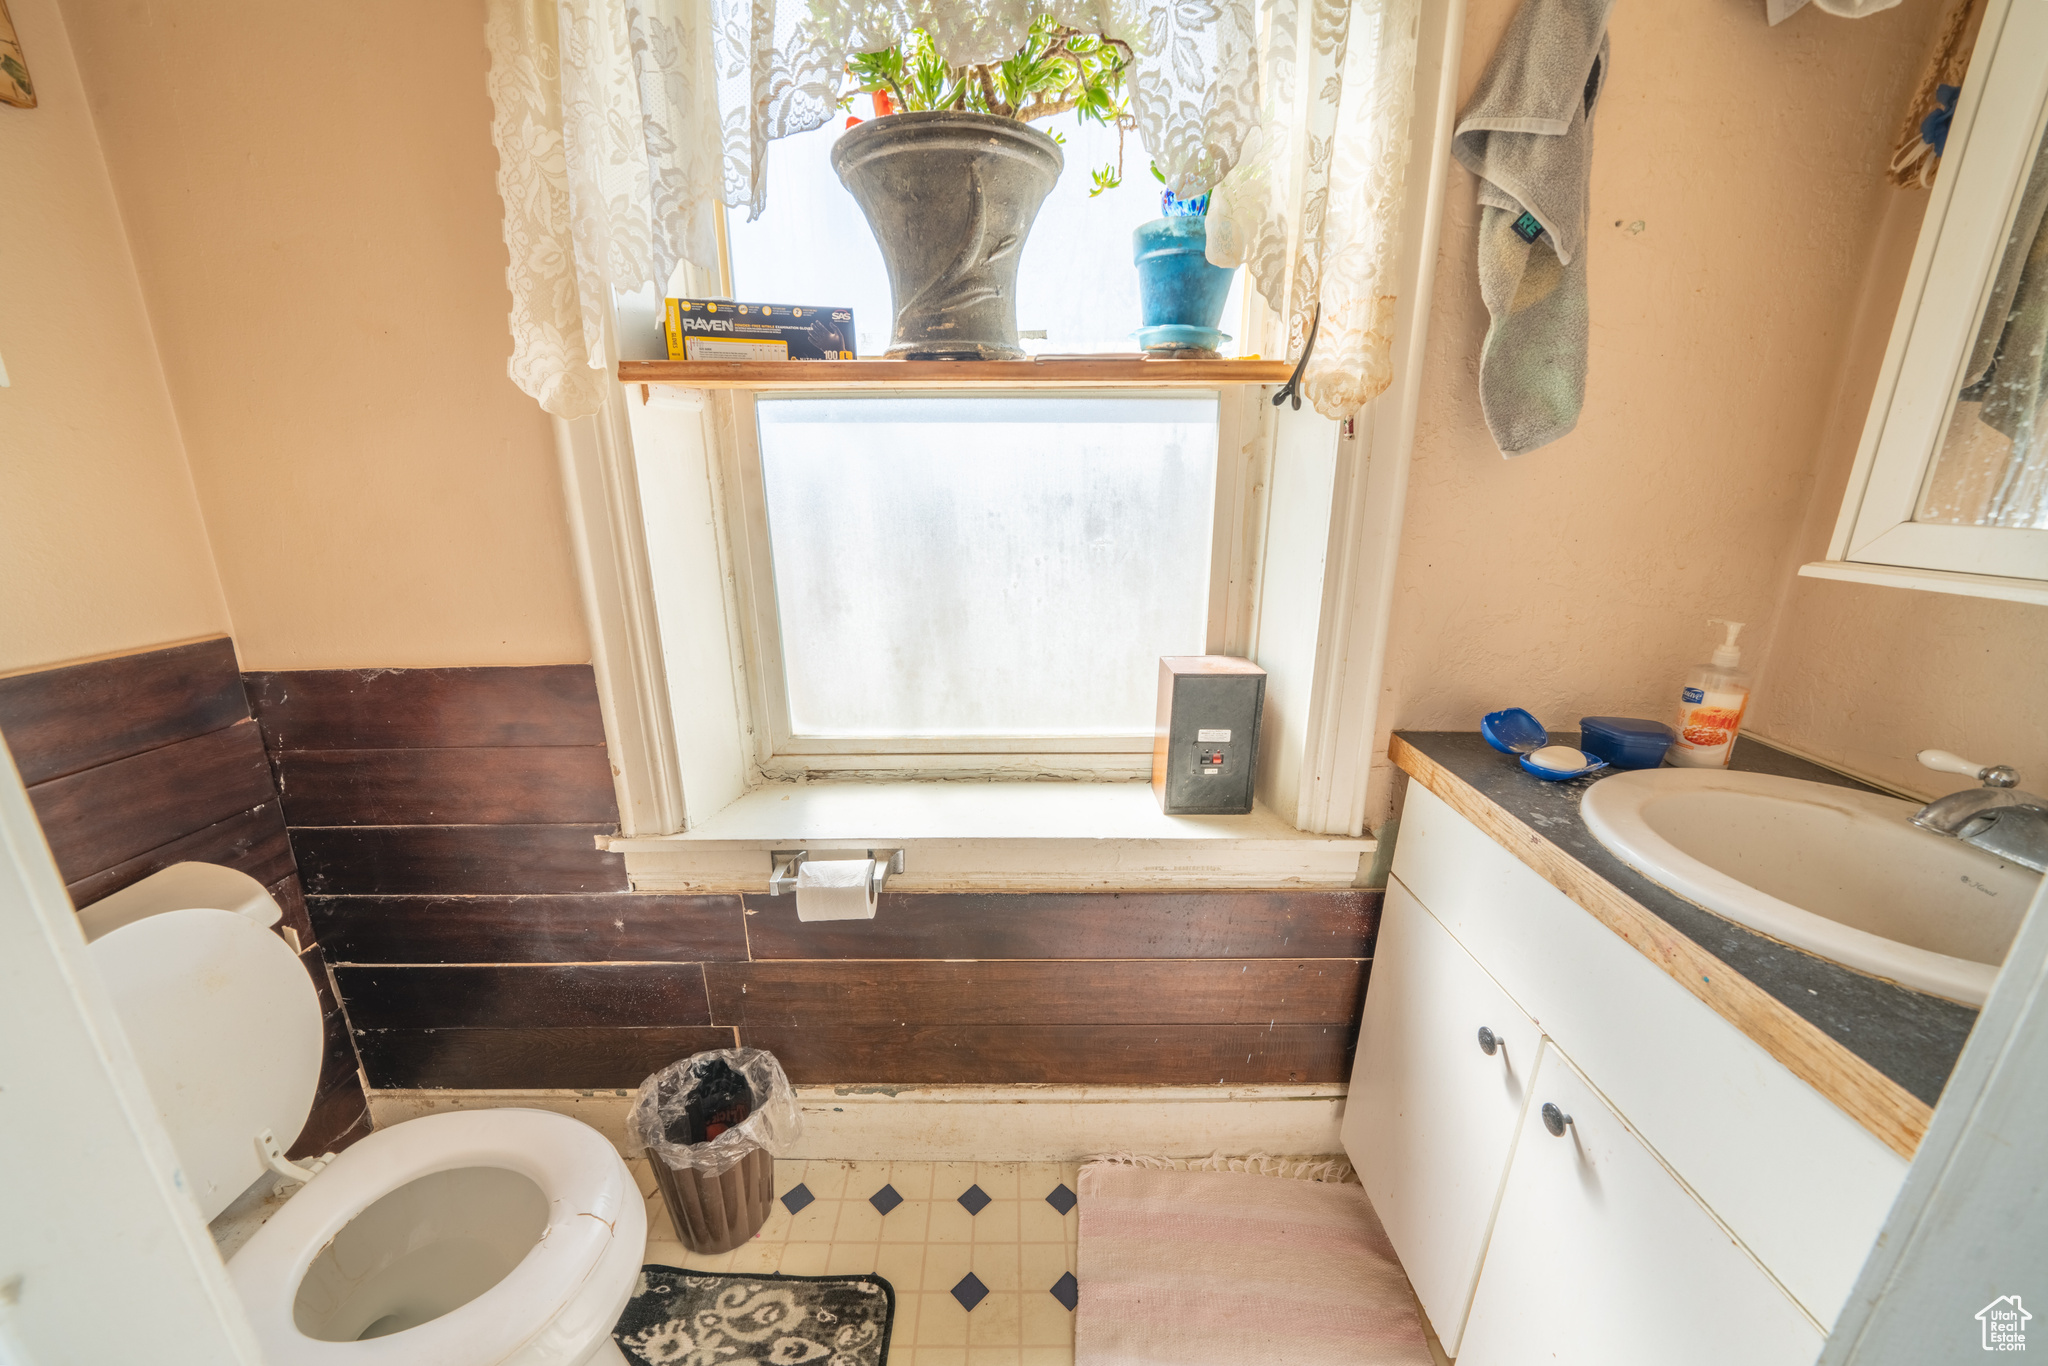 Half bathroom with vanity, toilet, tile flooring, and a healthy amount of sunlight